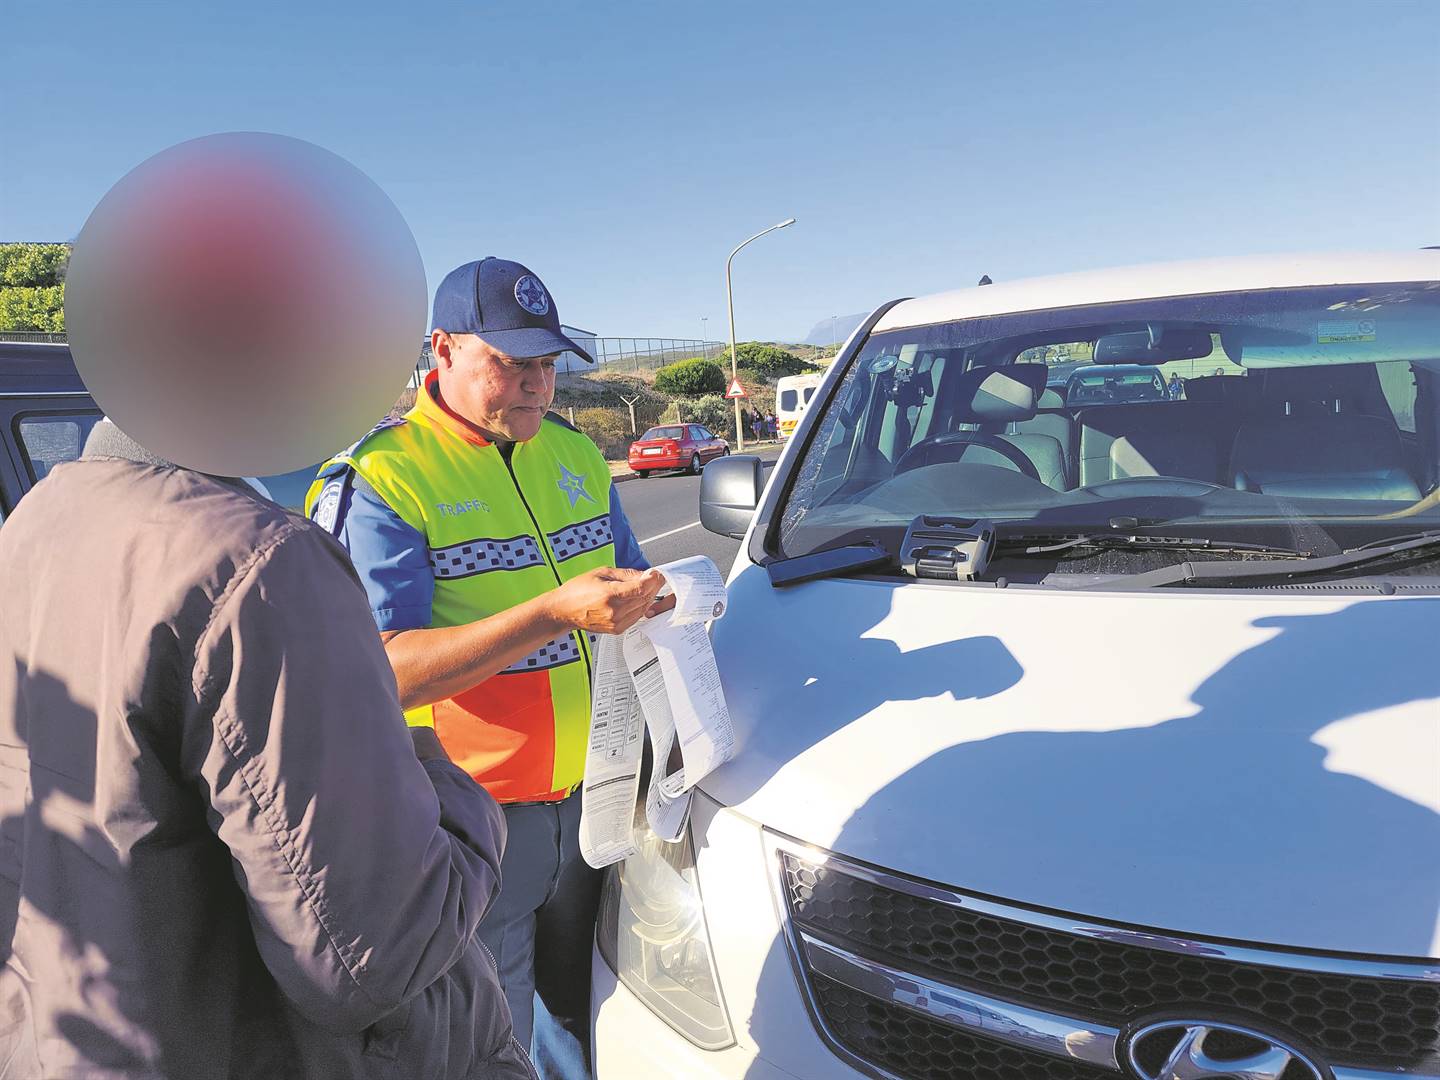 One scholar transport driver in Mitchell’s Plain was already arrested for drunk driving, and his vehicle was also found to be unroadworthy.